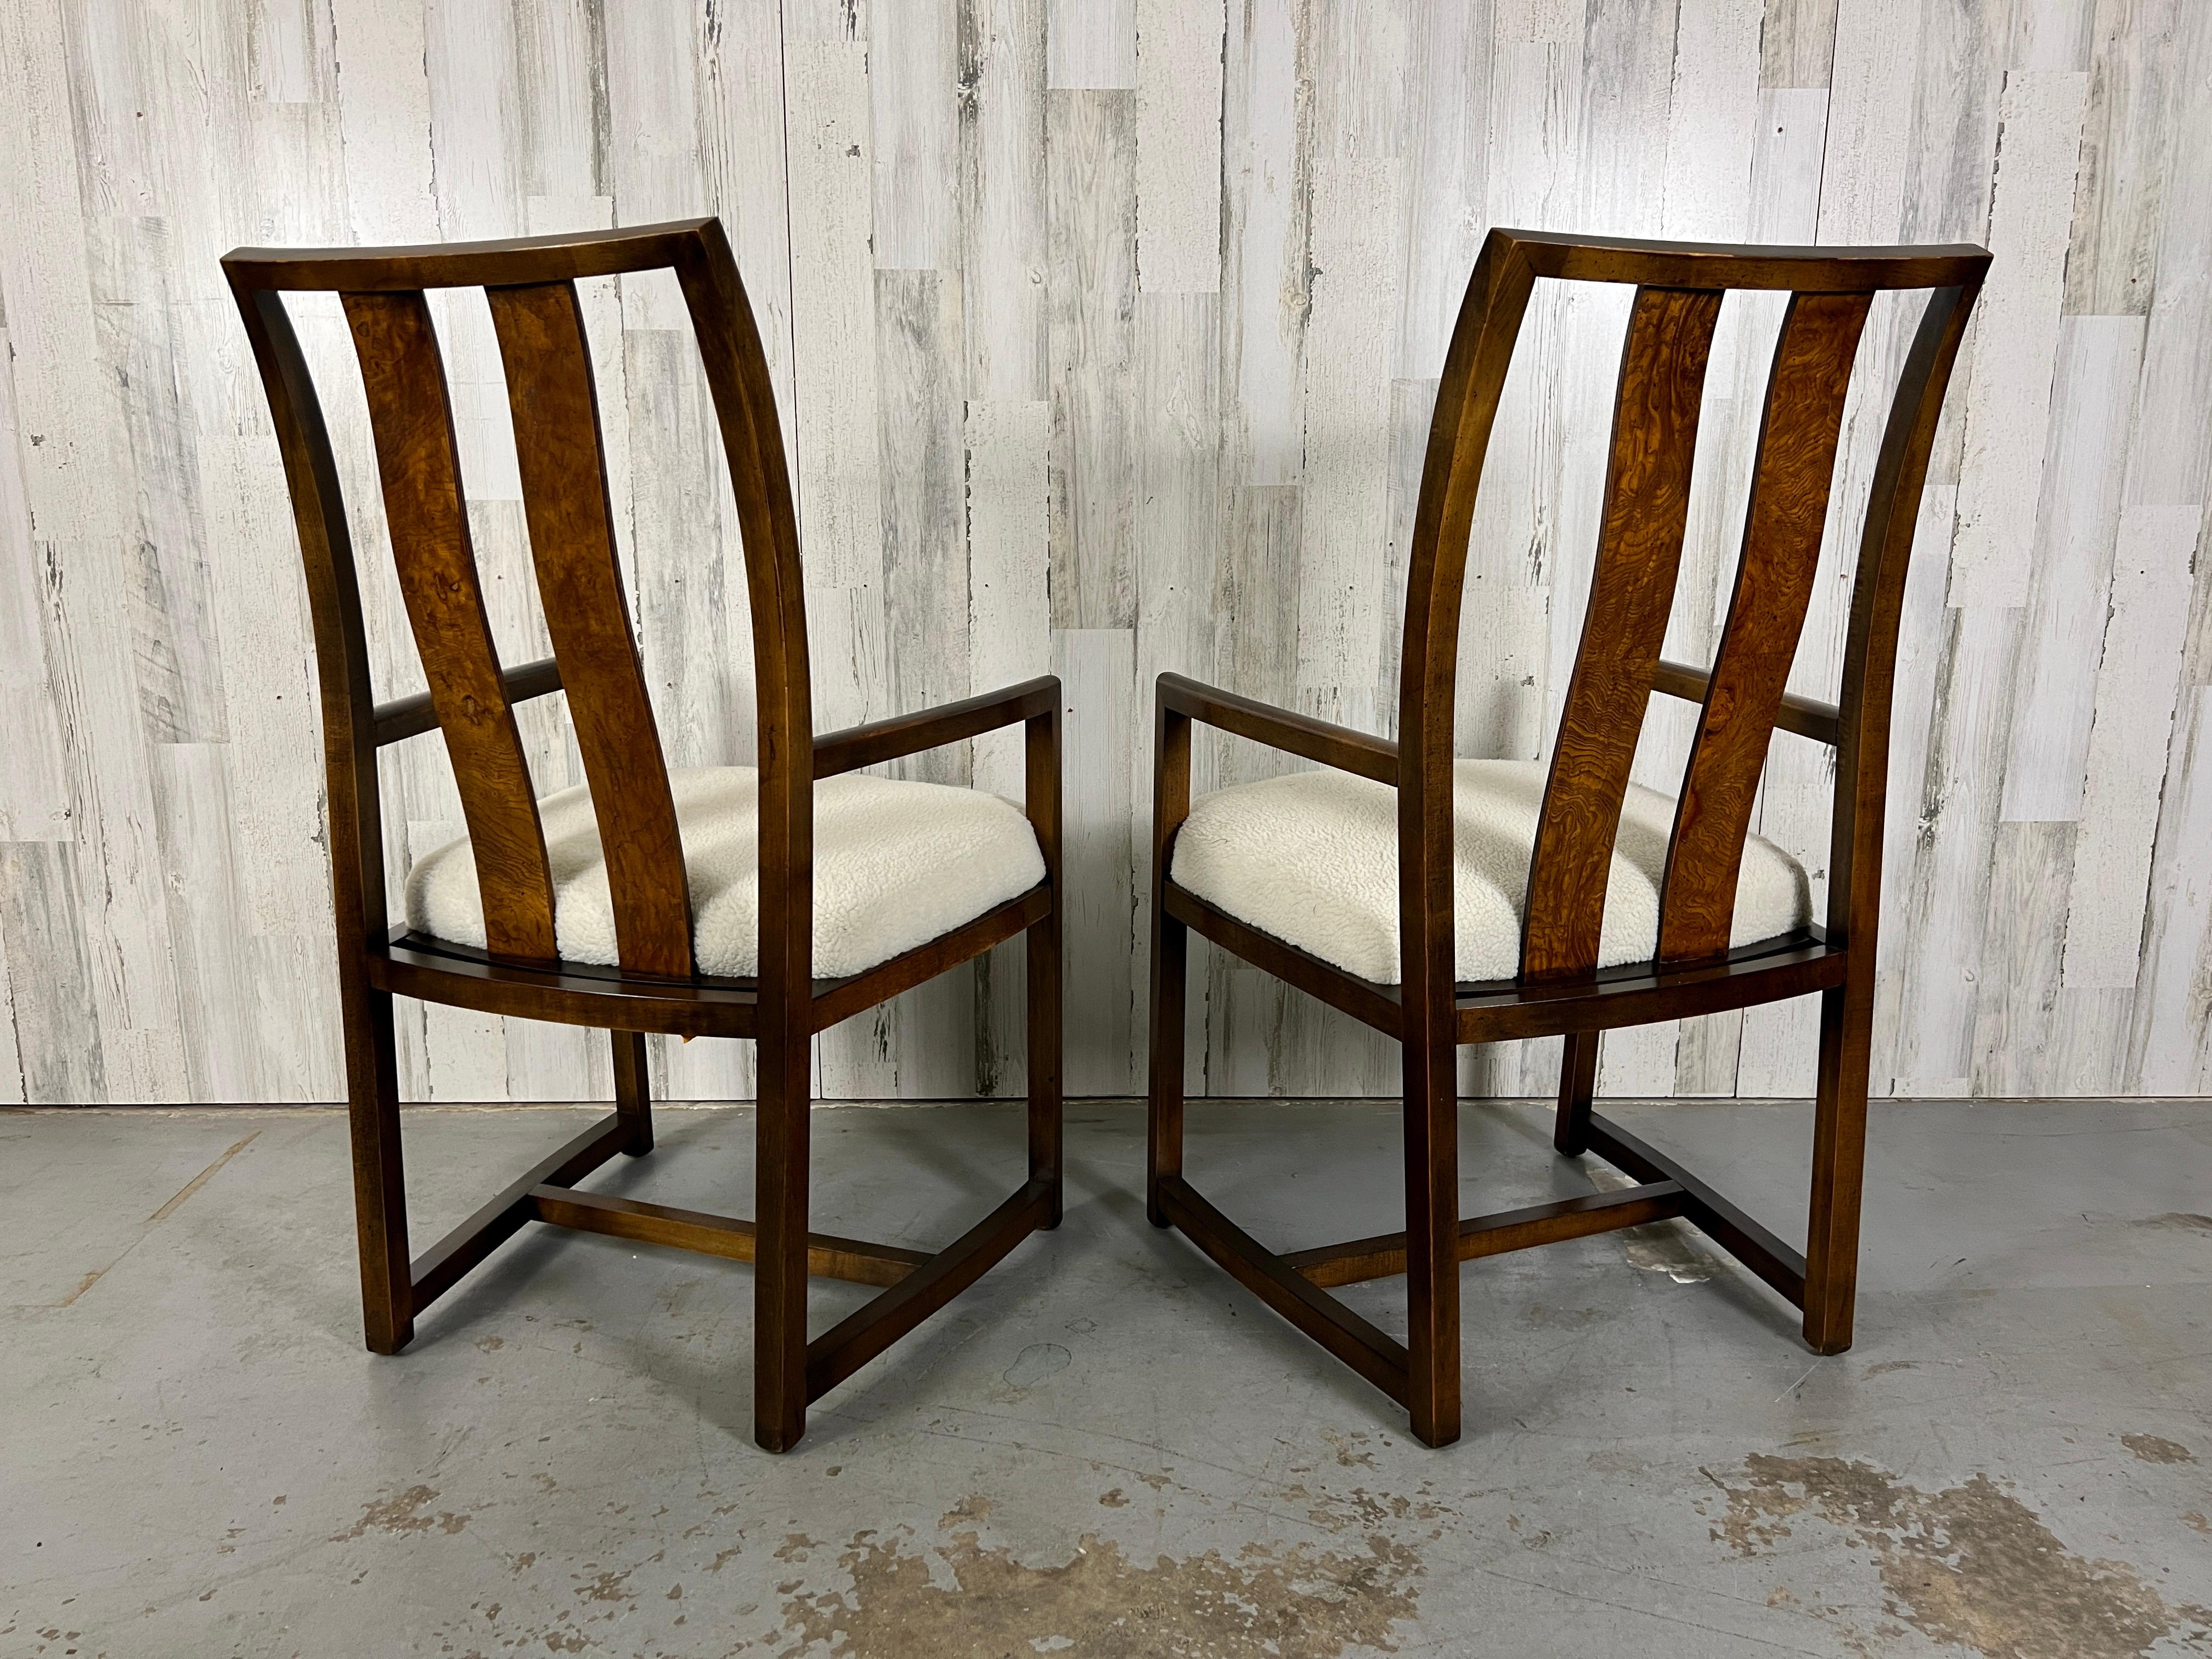 North American 1980s Modernist Dining Chairs with Burl Wood Back Splat For Sale